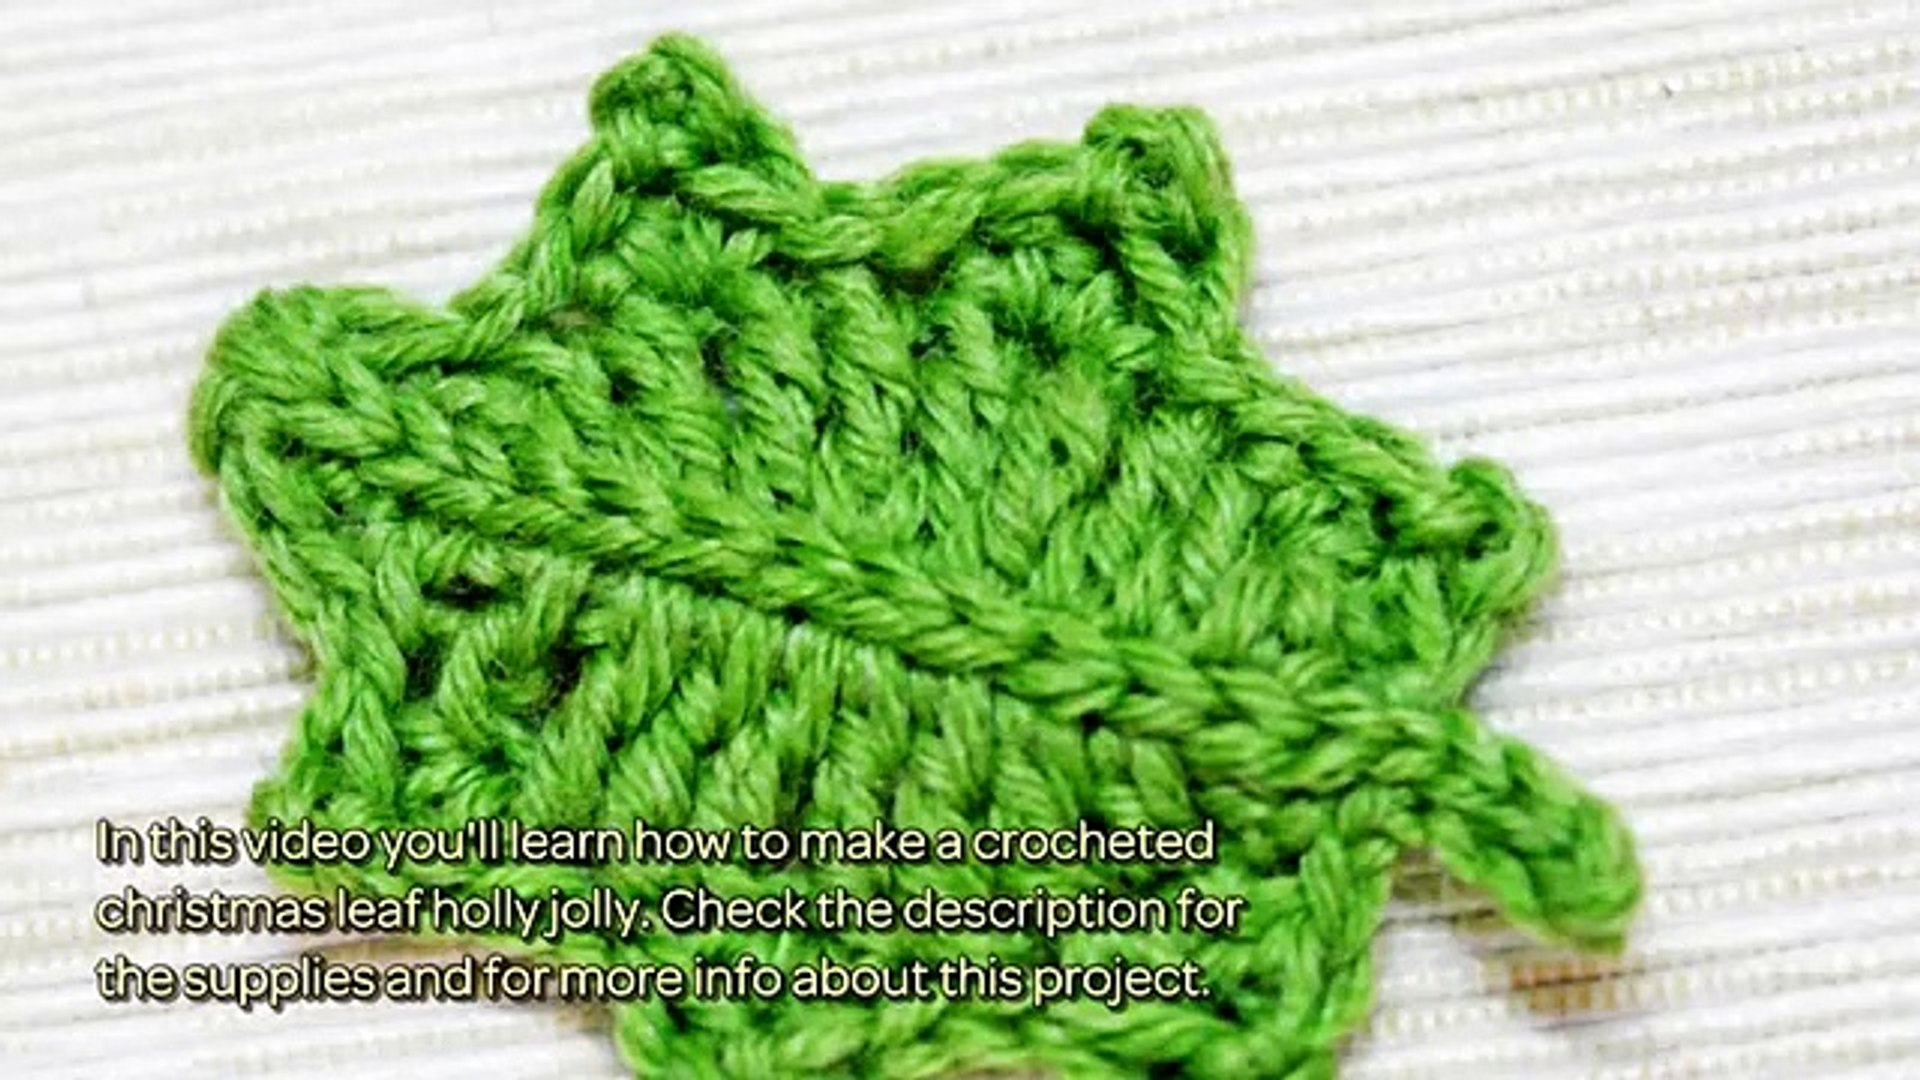 Crochet Leaf Pattern Video How To Make A Crocheted Christmas Leaf Holly Jolly Diy Crafts